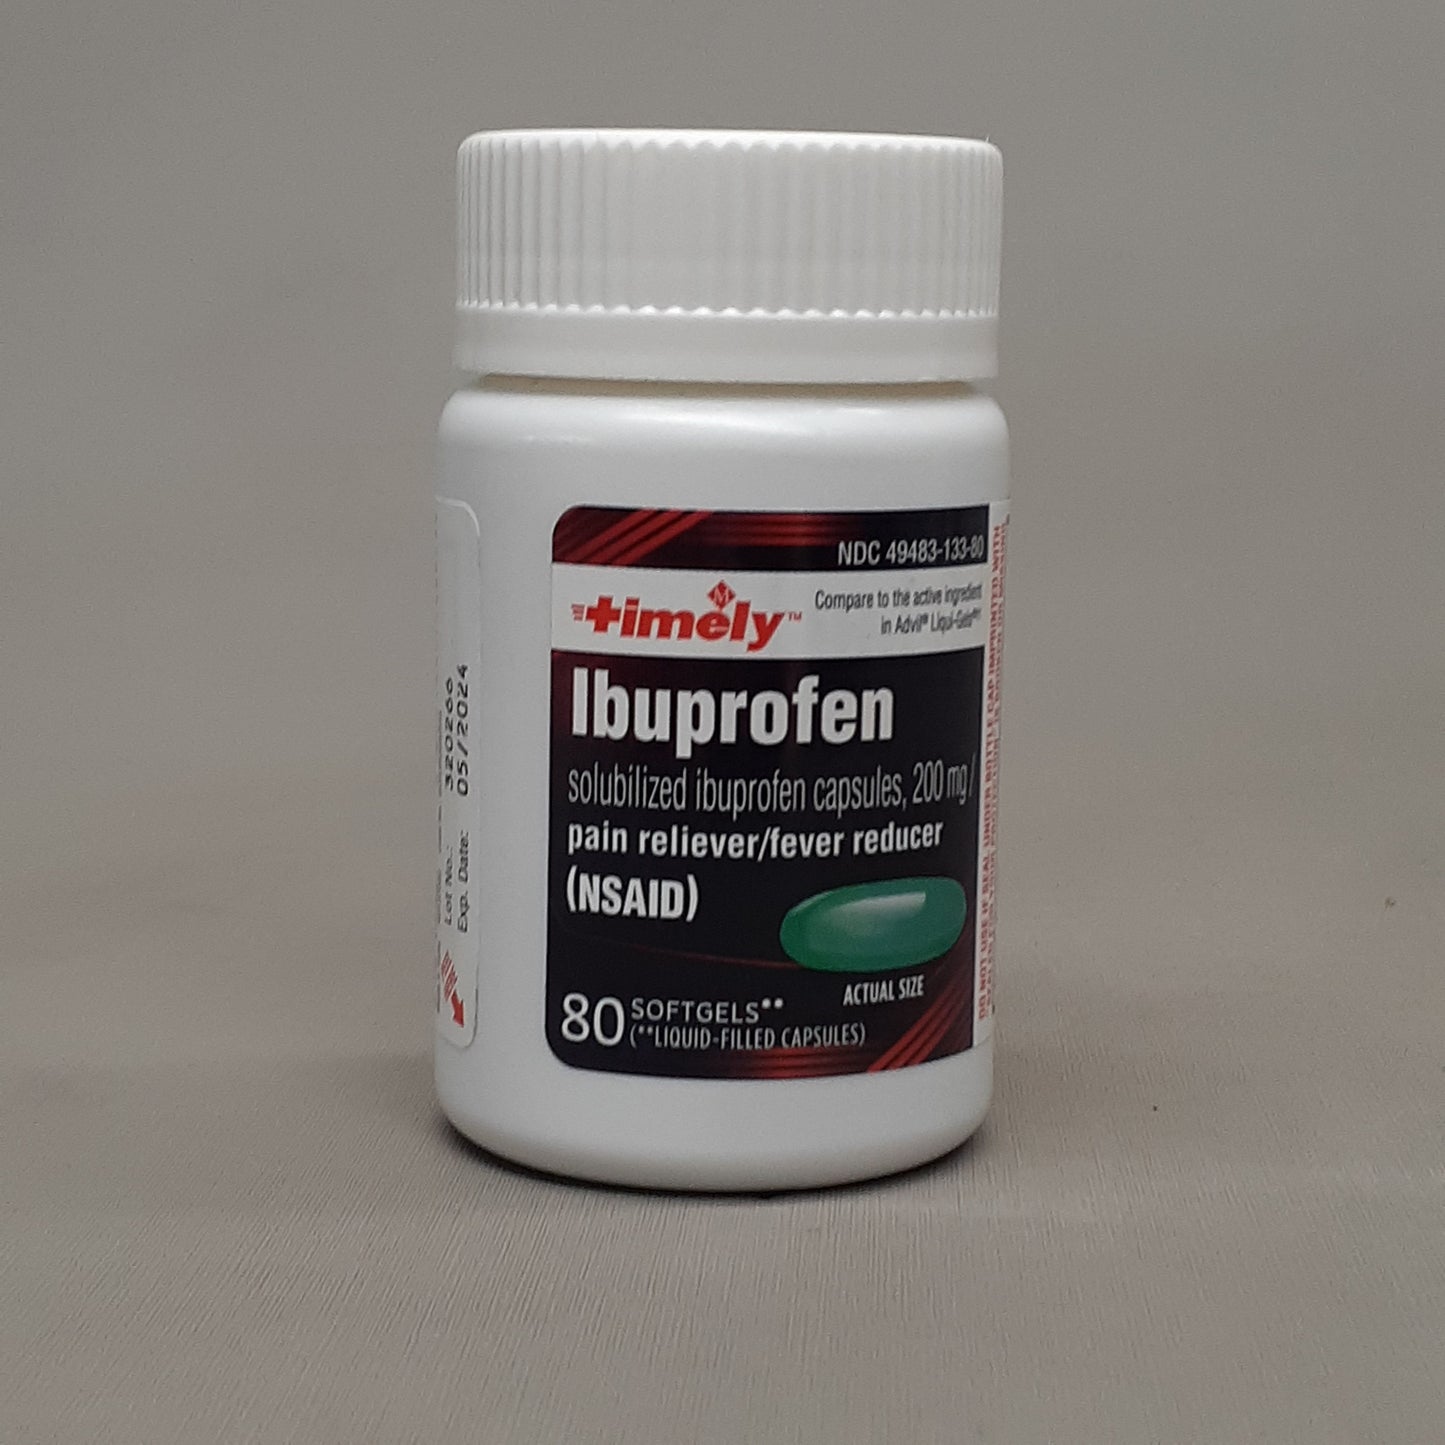 TIMELY Ibuprofen 6-PACK! 80 Softgels 200mg Pain Reliever/Fever Reducer BB 05/24 (New)